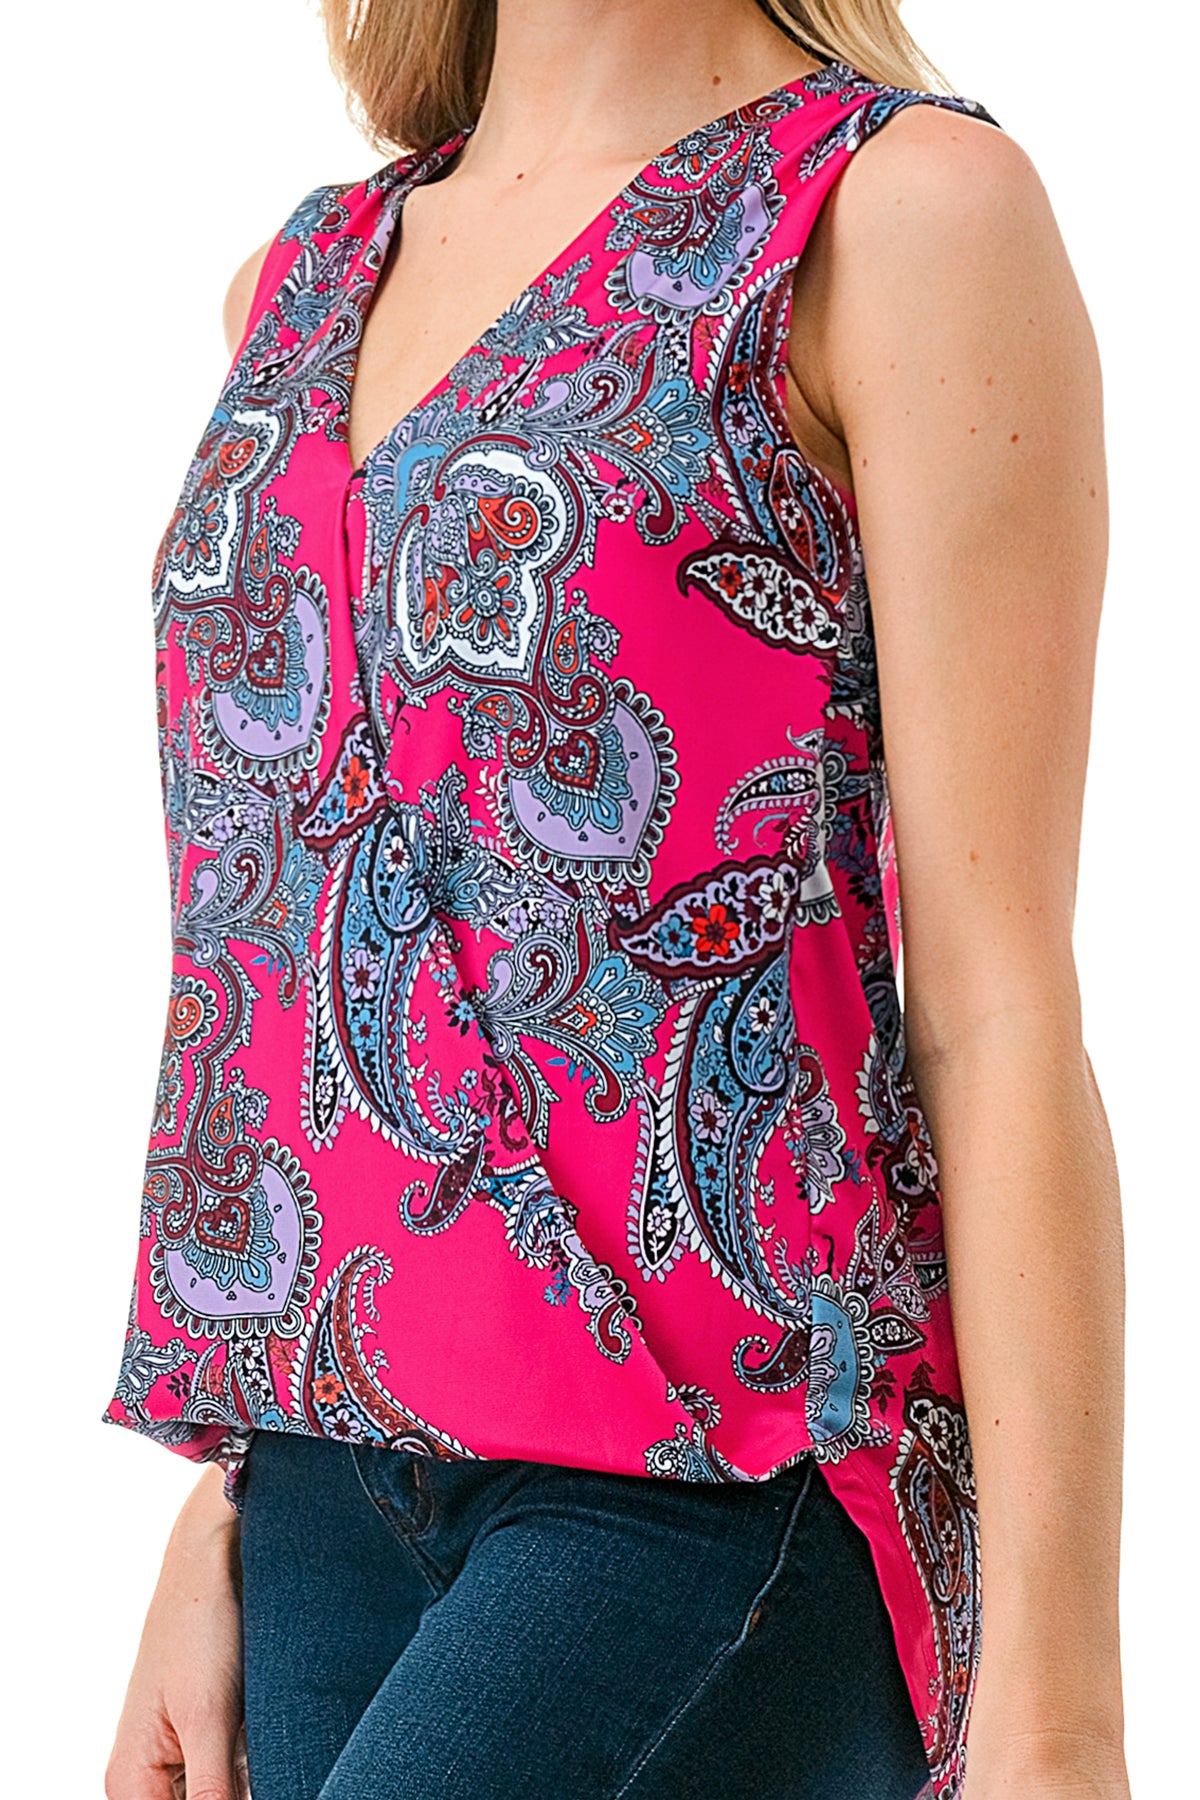 ANOUK SURPLICE HIGH AND LOW TOP (HOT PINK PAISLEY)- VT3201